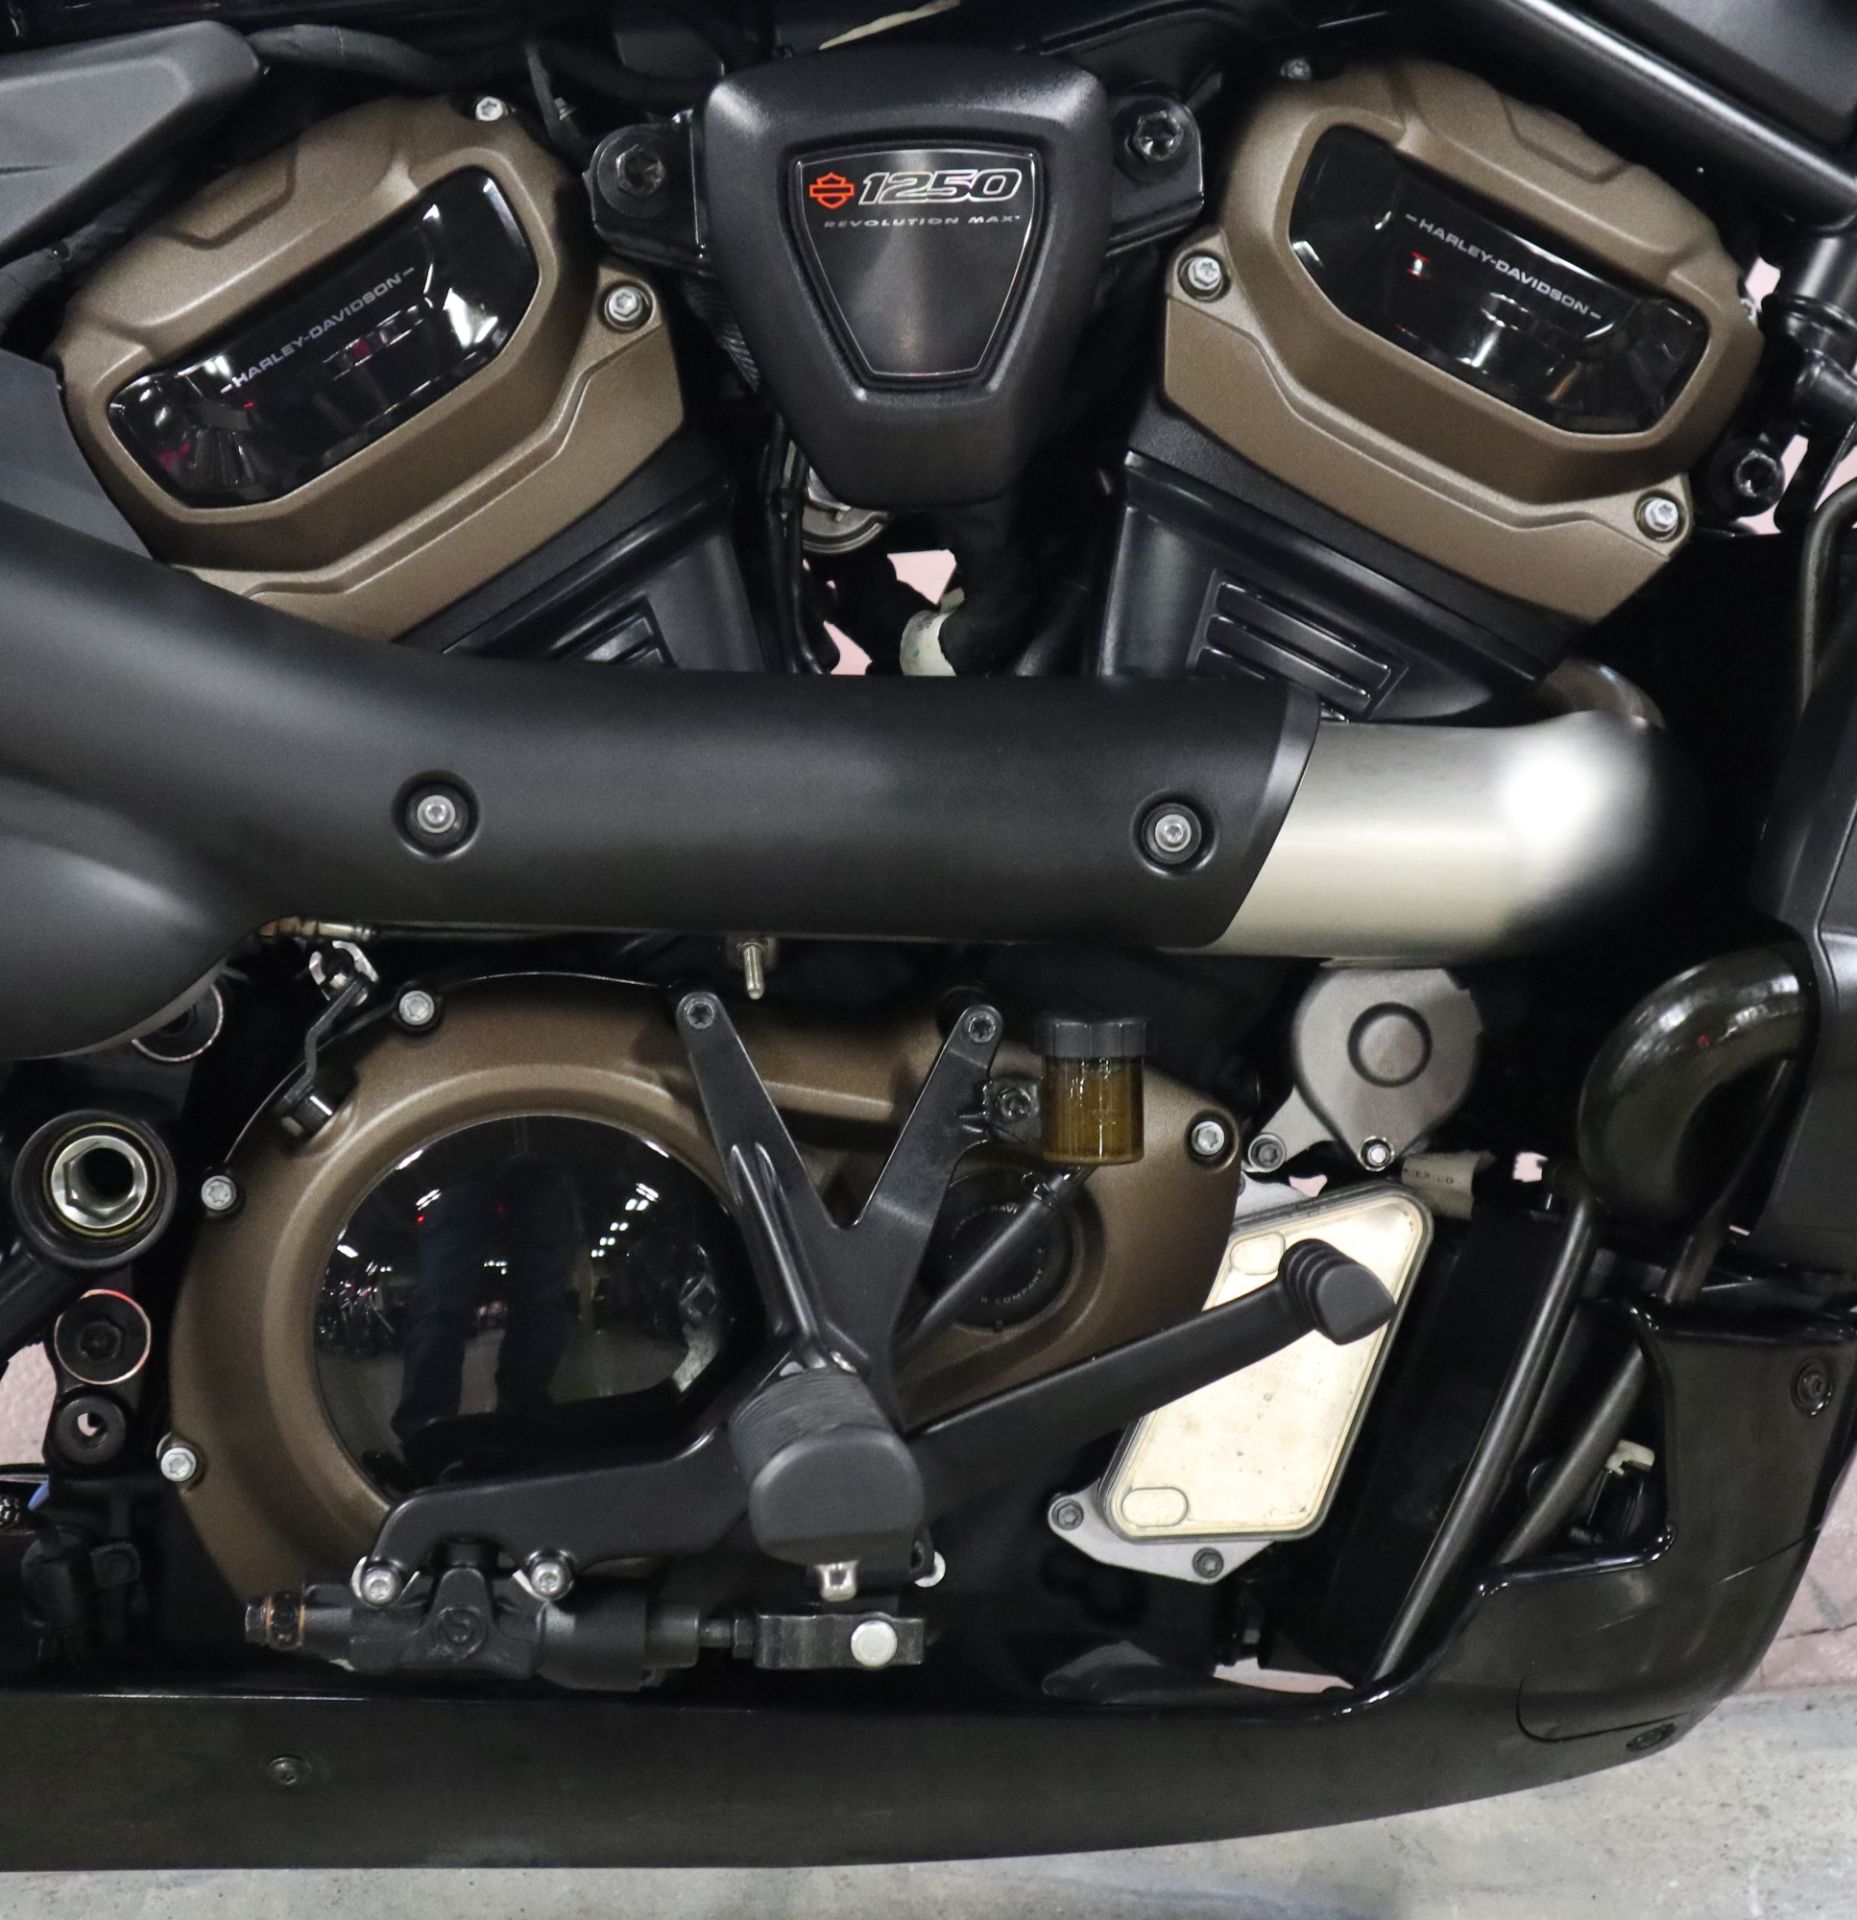 2021 Harley-Davidson Sportster® S in New London, Connecticut - Photo 19